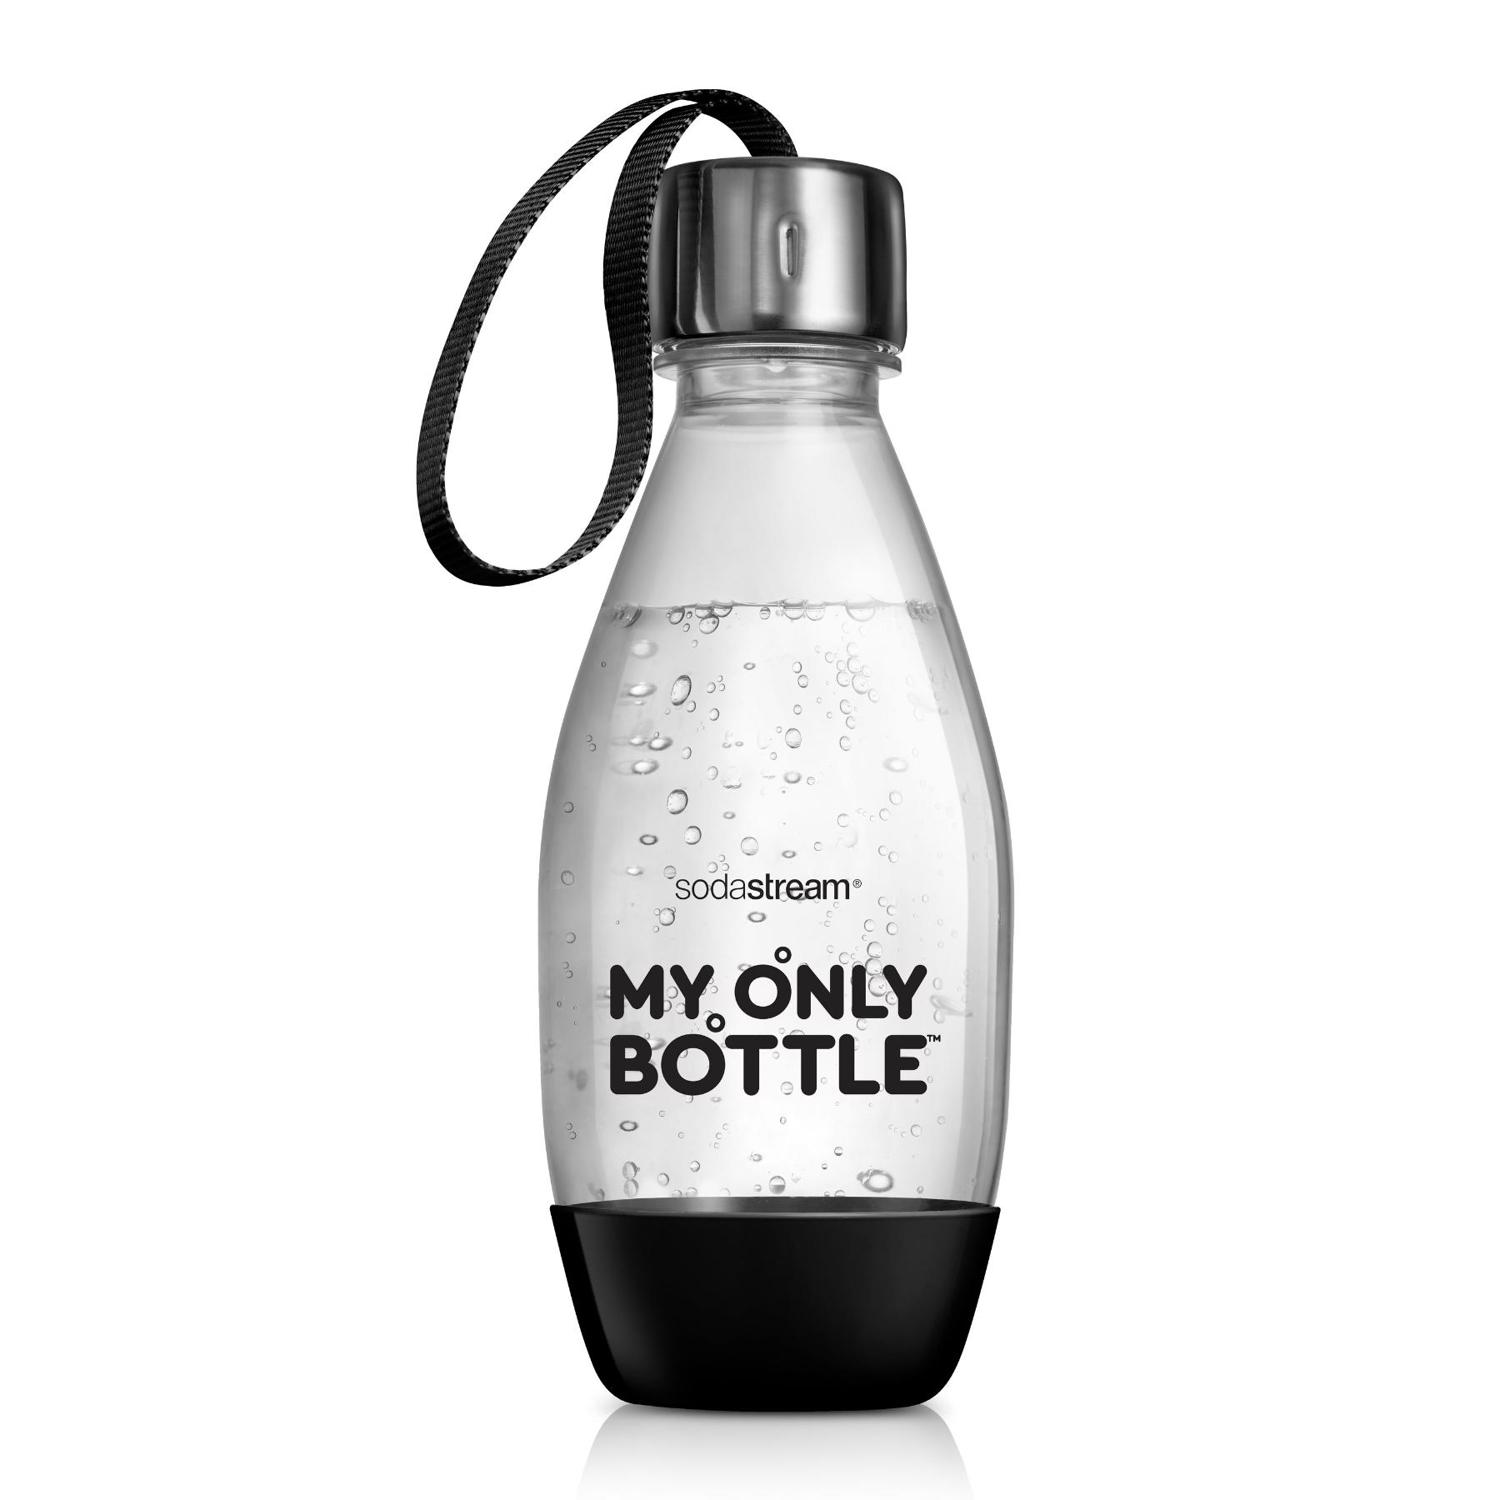 Photos - Other Accessories SodaStream My Only Bottle Black 0.5 L Carbonator Bottle 1 pk 1748162010 